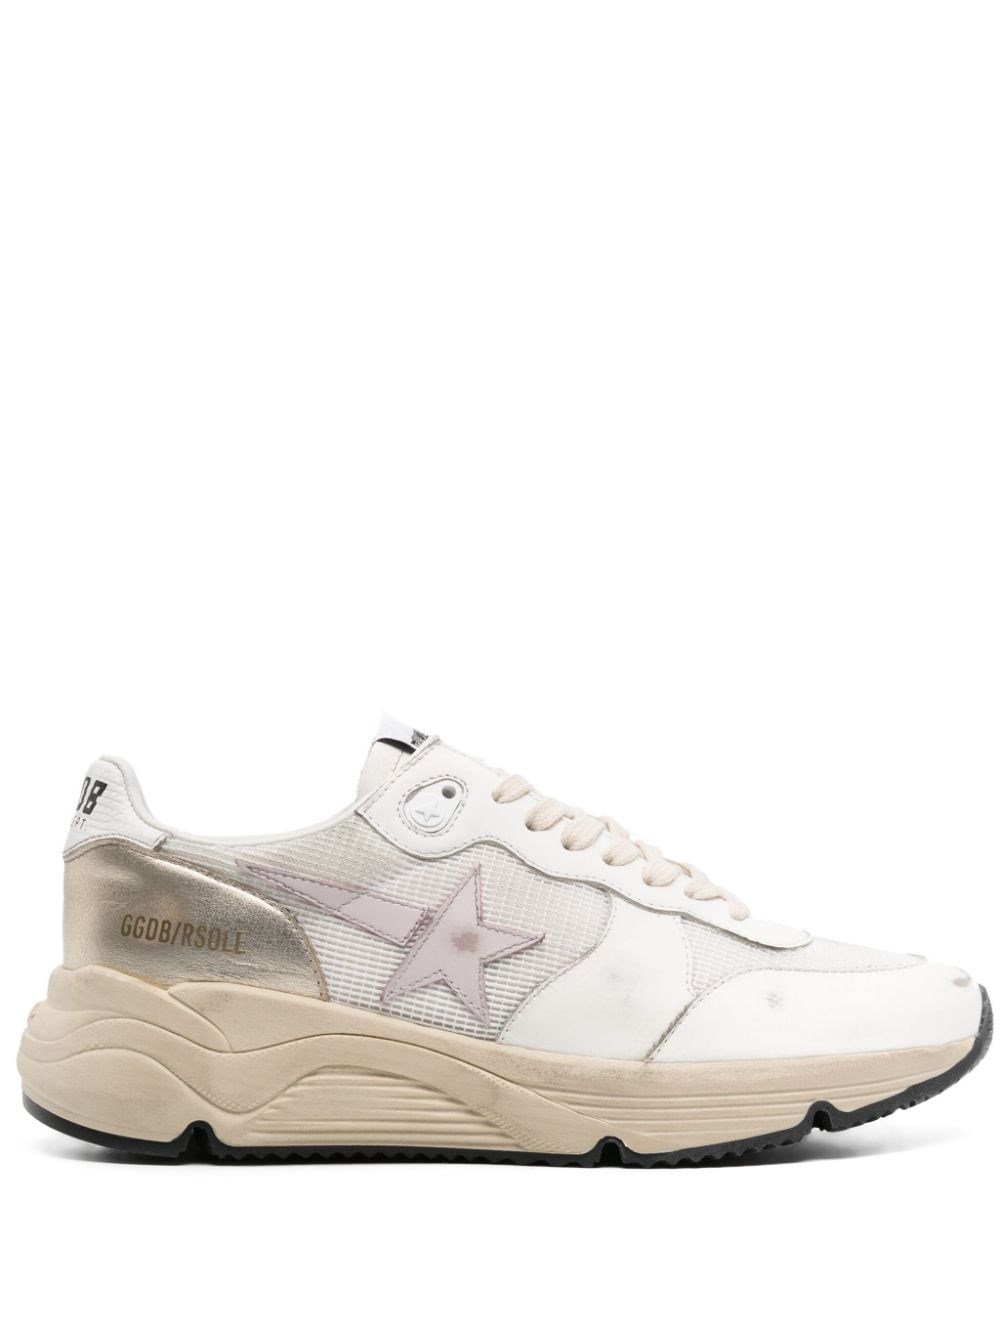 Golden Goose Running Sole Chunky Sneakers In White